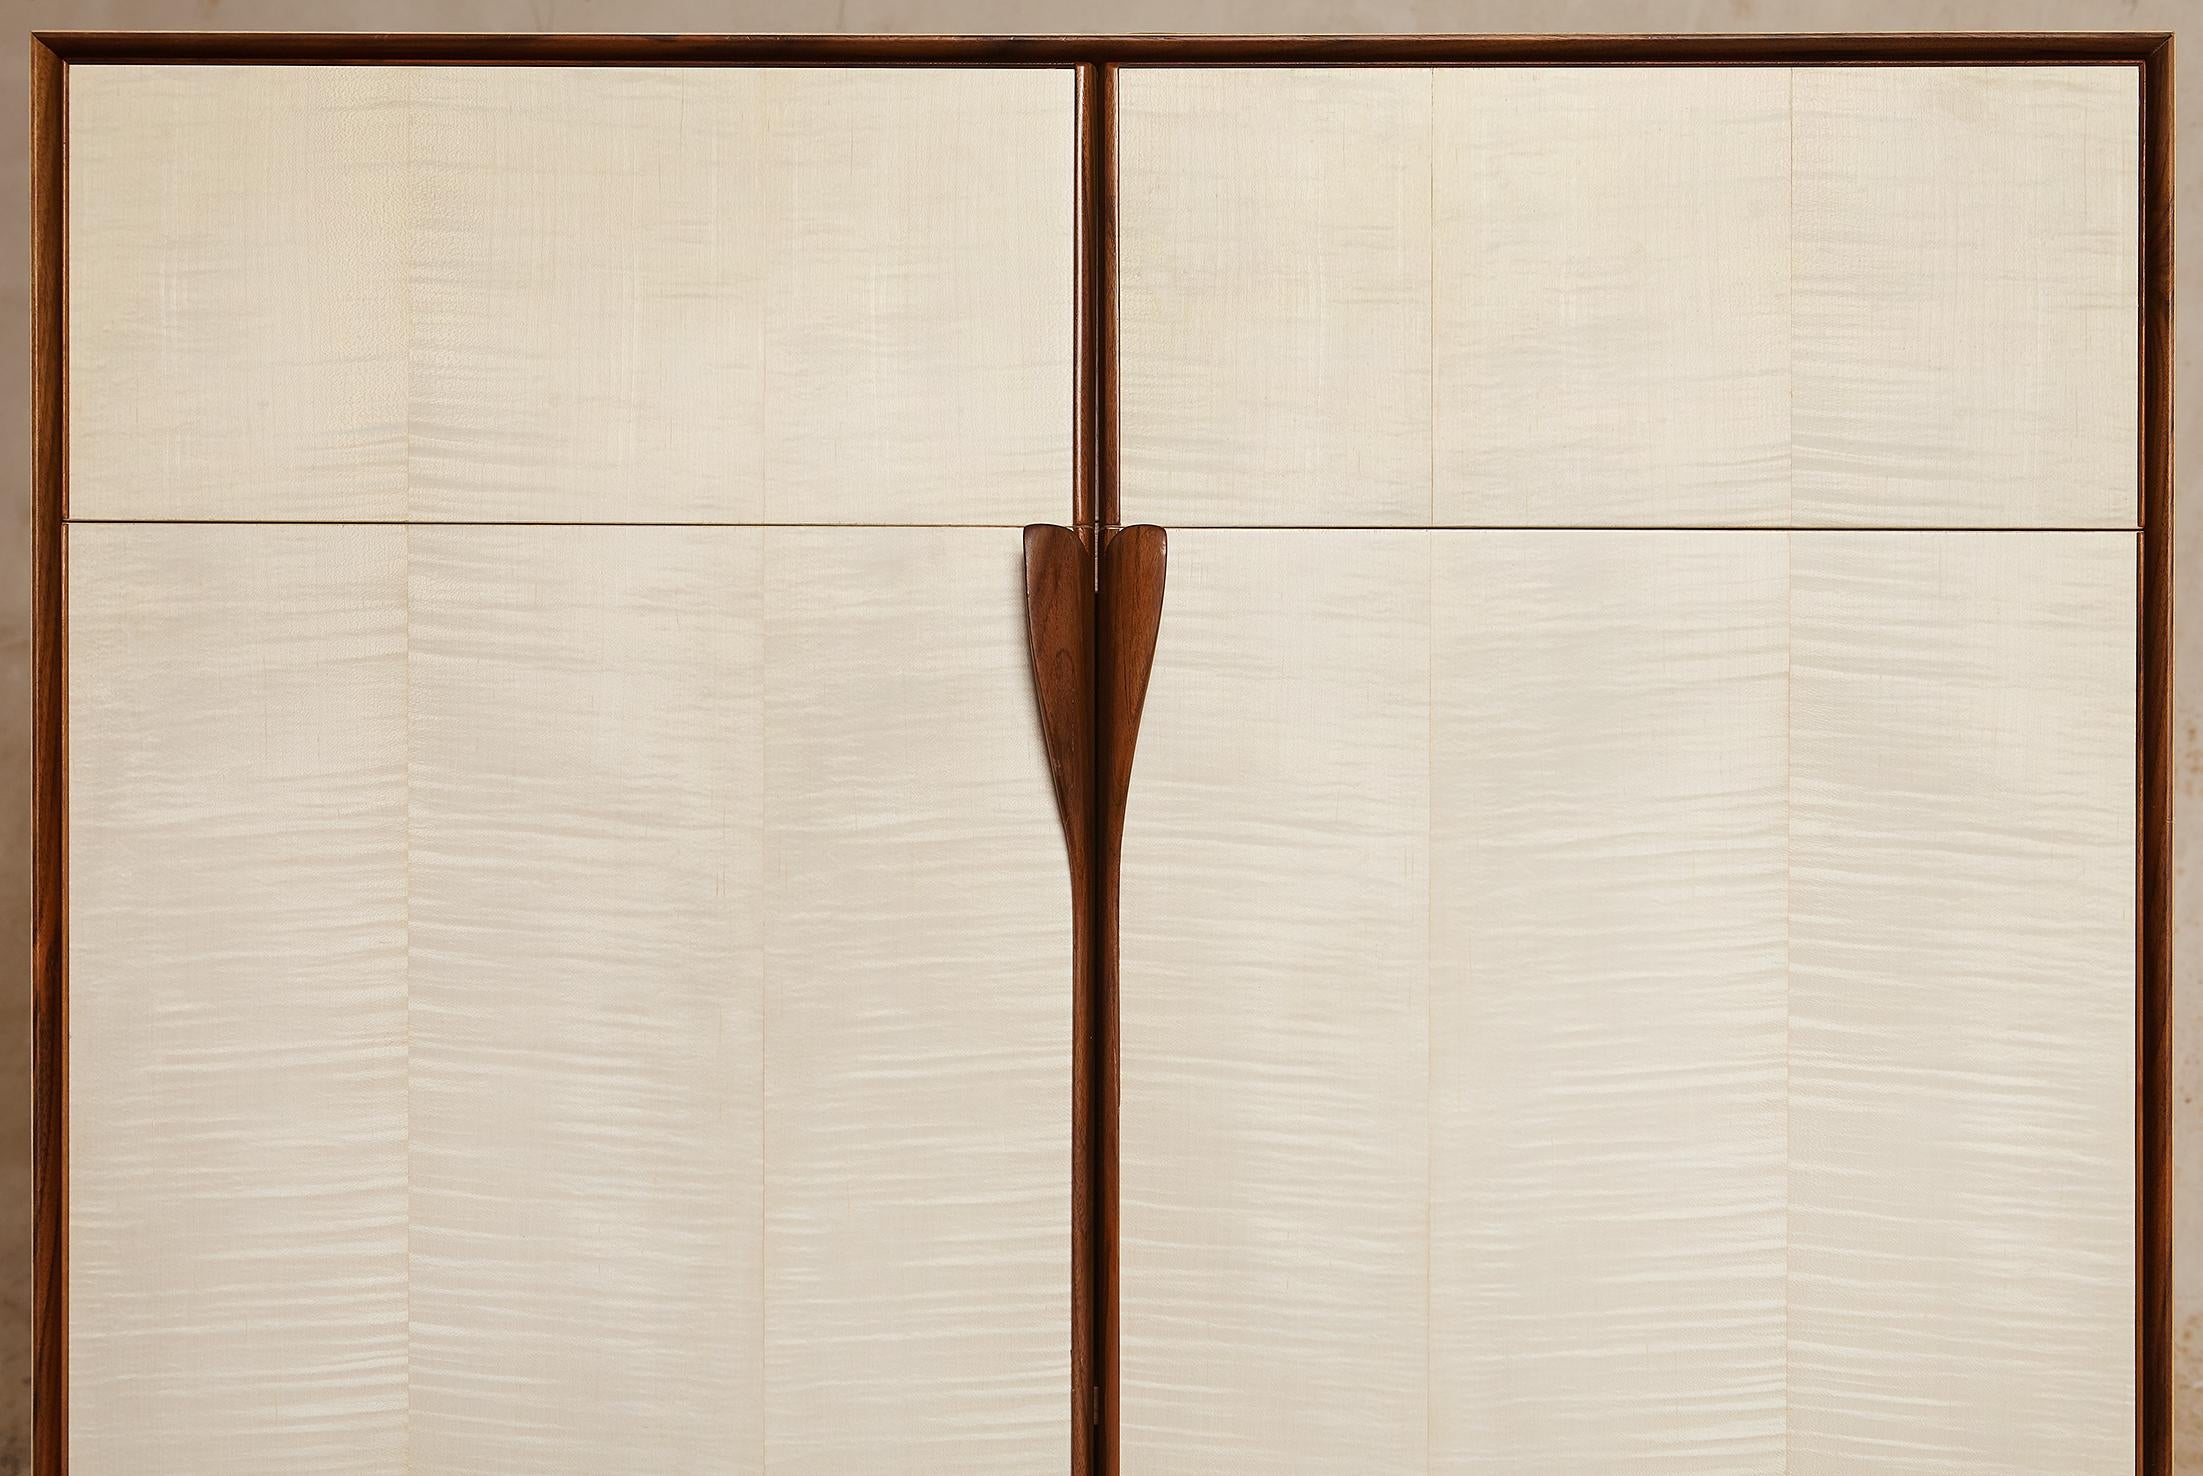 Tall and well-proportioned cabinet unit in bleached maple veneer with walnut solid wood framing.
The quarter inch thick walnut profile frames the piece and divides the different units, and transforms into legs at the base and into the shaped leaves